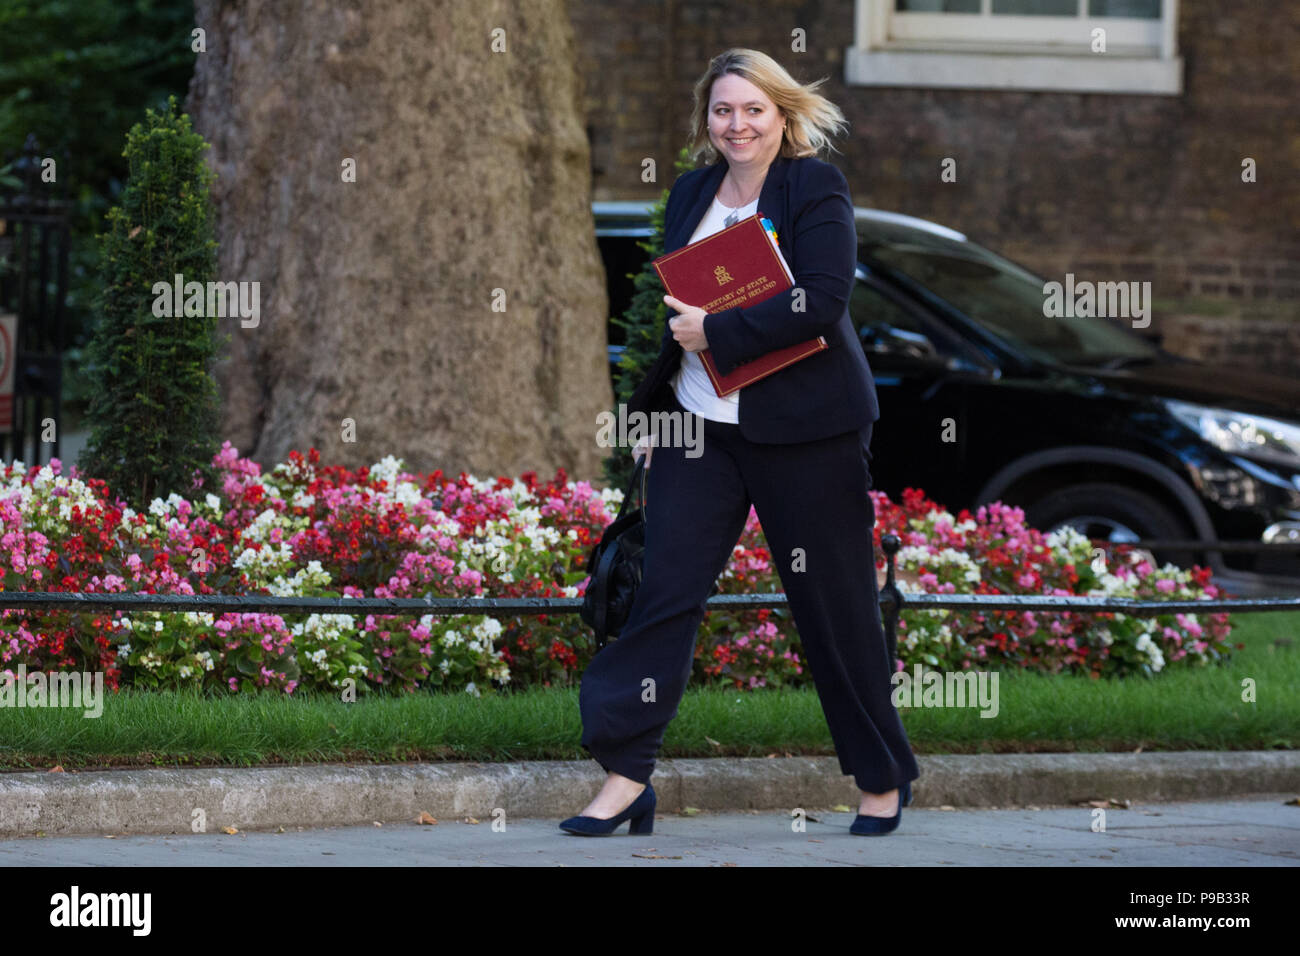 London, UK. 17th July, 2018. Karen Bradley MP, Secretary of State for Northern Ireland,  arrives at 10 Downing Street for the final Cabinet meeting before the summer recess. Credit: Mark Kerrison/Alamy Live News Stock Photo